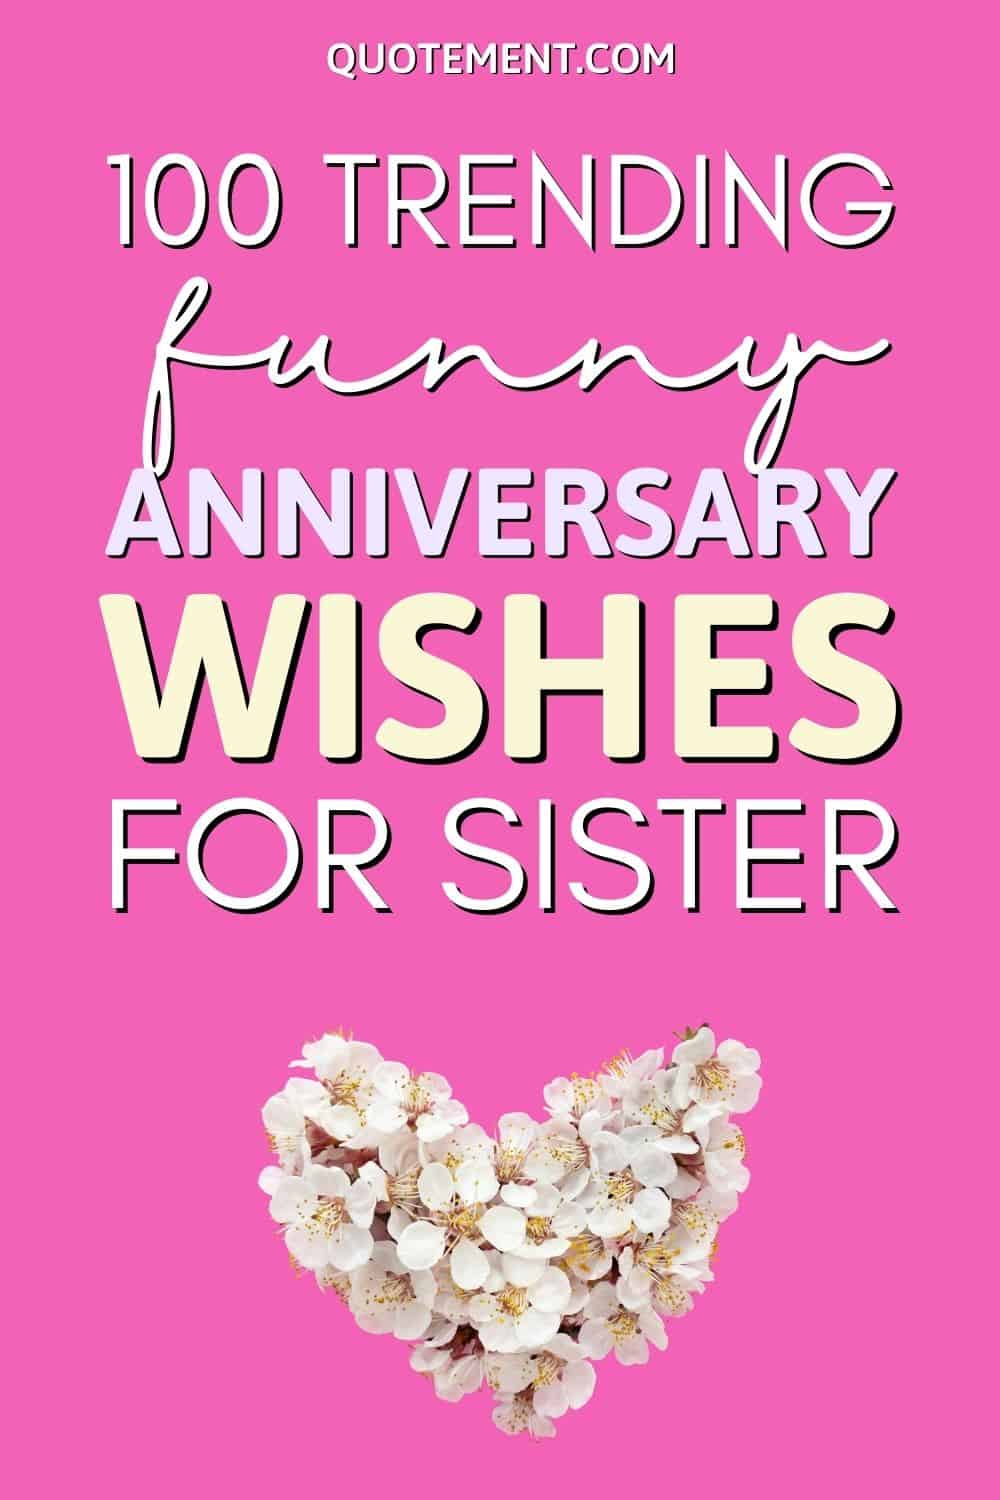 100 Trending Funny Anniversary Wishes For Sister